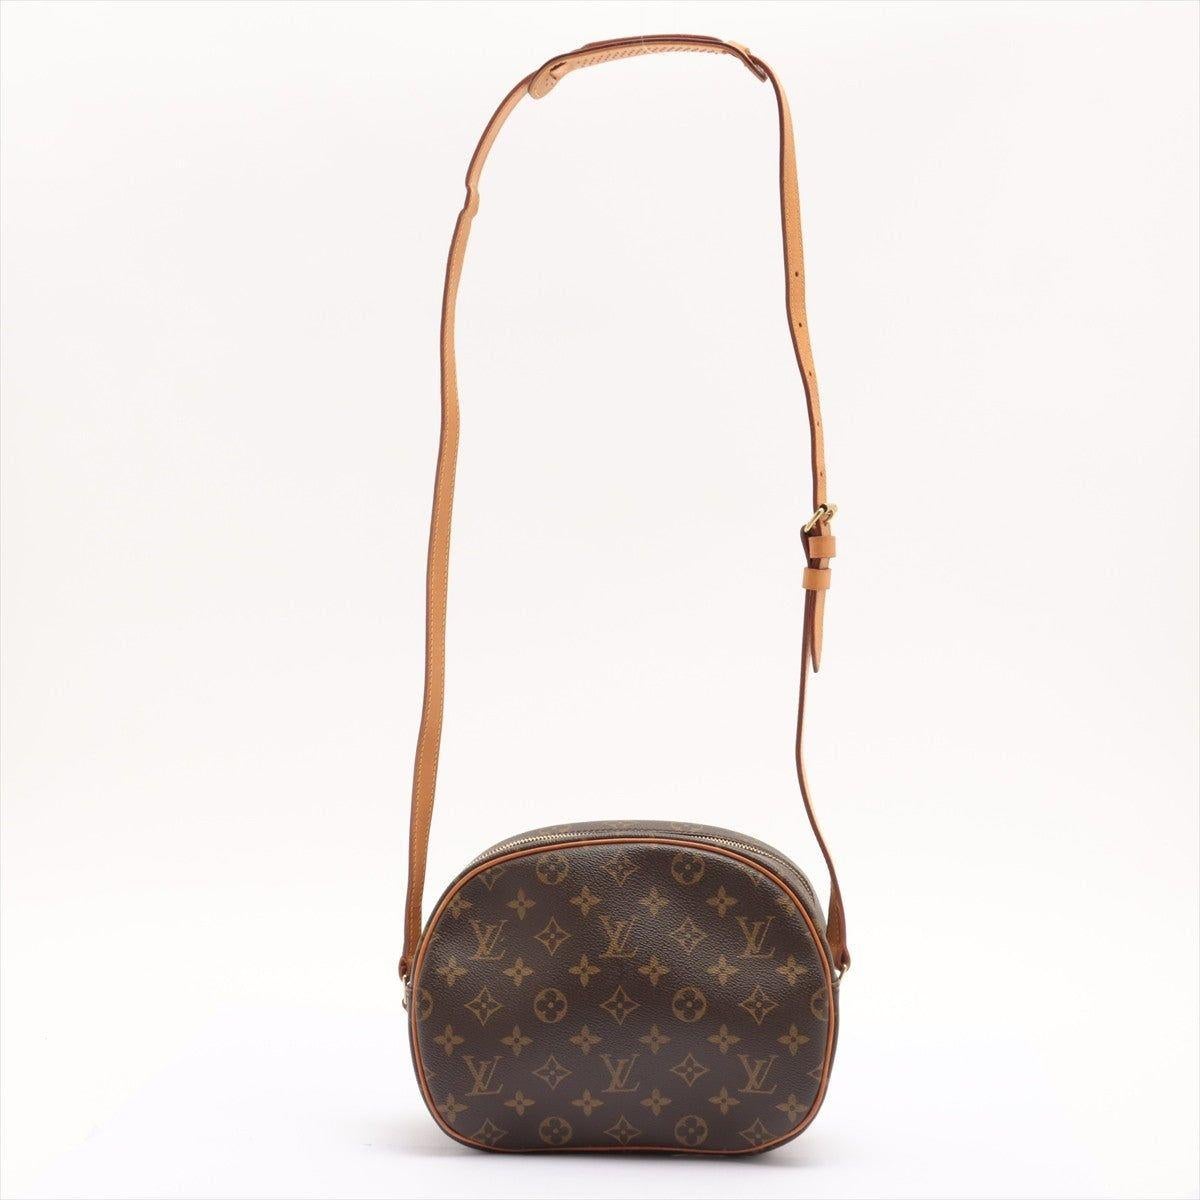 Brown and tan monogram coated canvas Louis Vuitton Blois bag with gold-tone hardware, tan vachetta leather trim, flat shoulder strap, exterior pocket at front, brown Taiga leather lining, single slit pocket at interior wall and zip closure at top.

